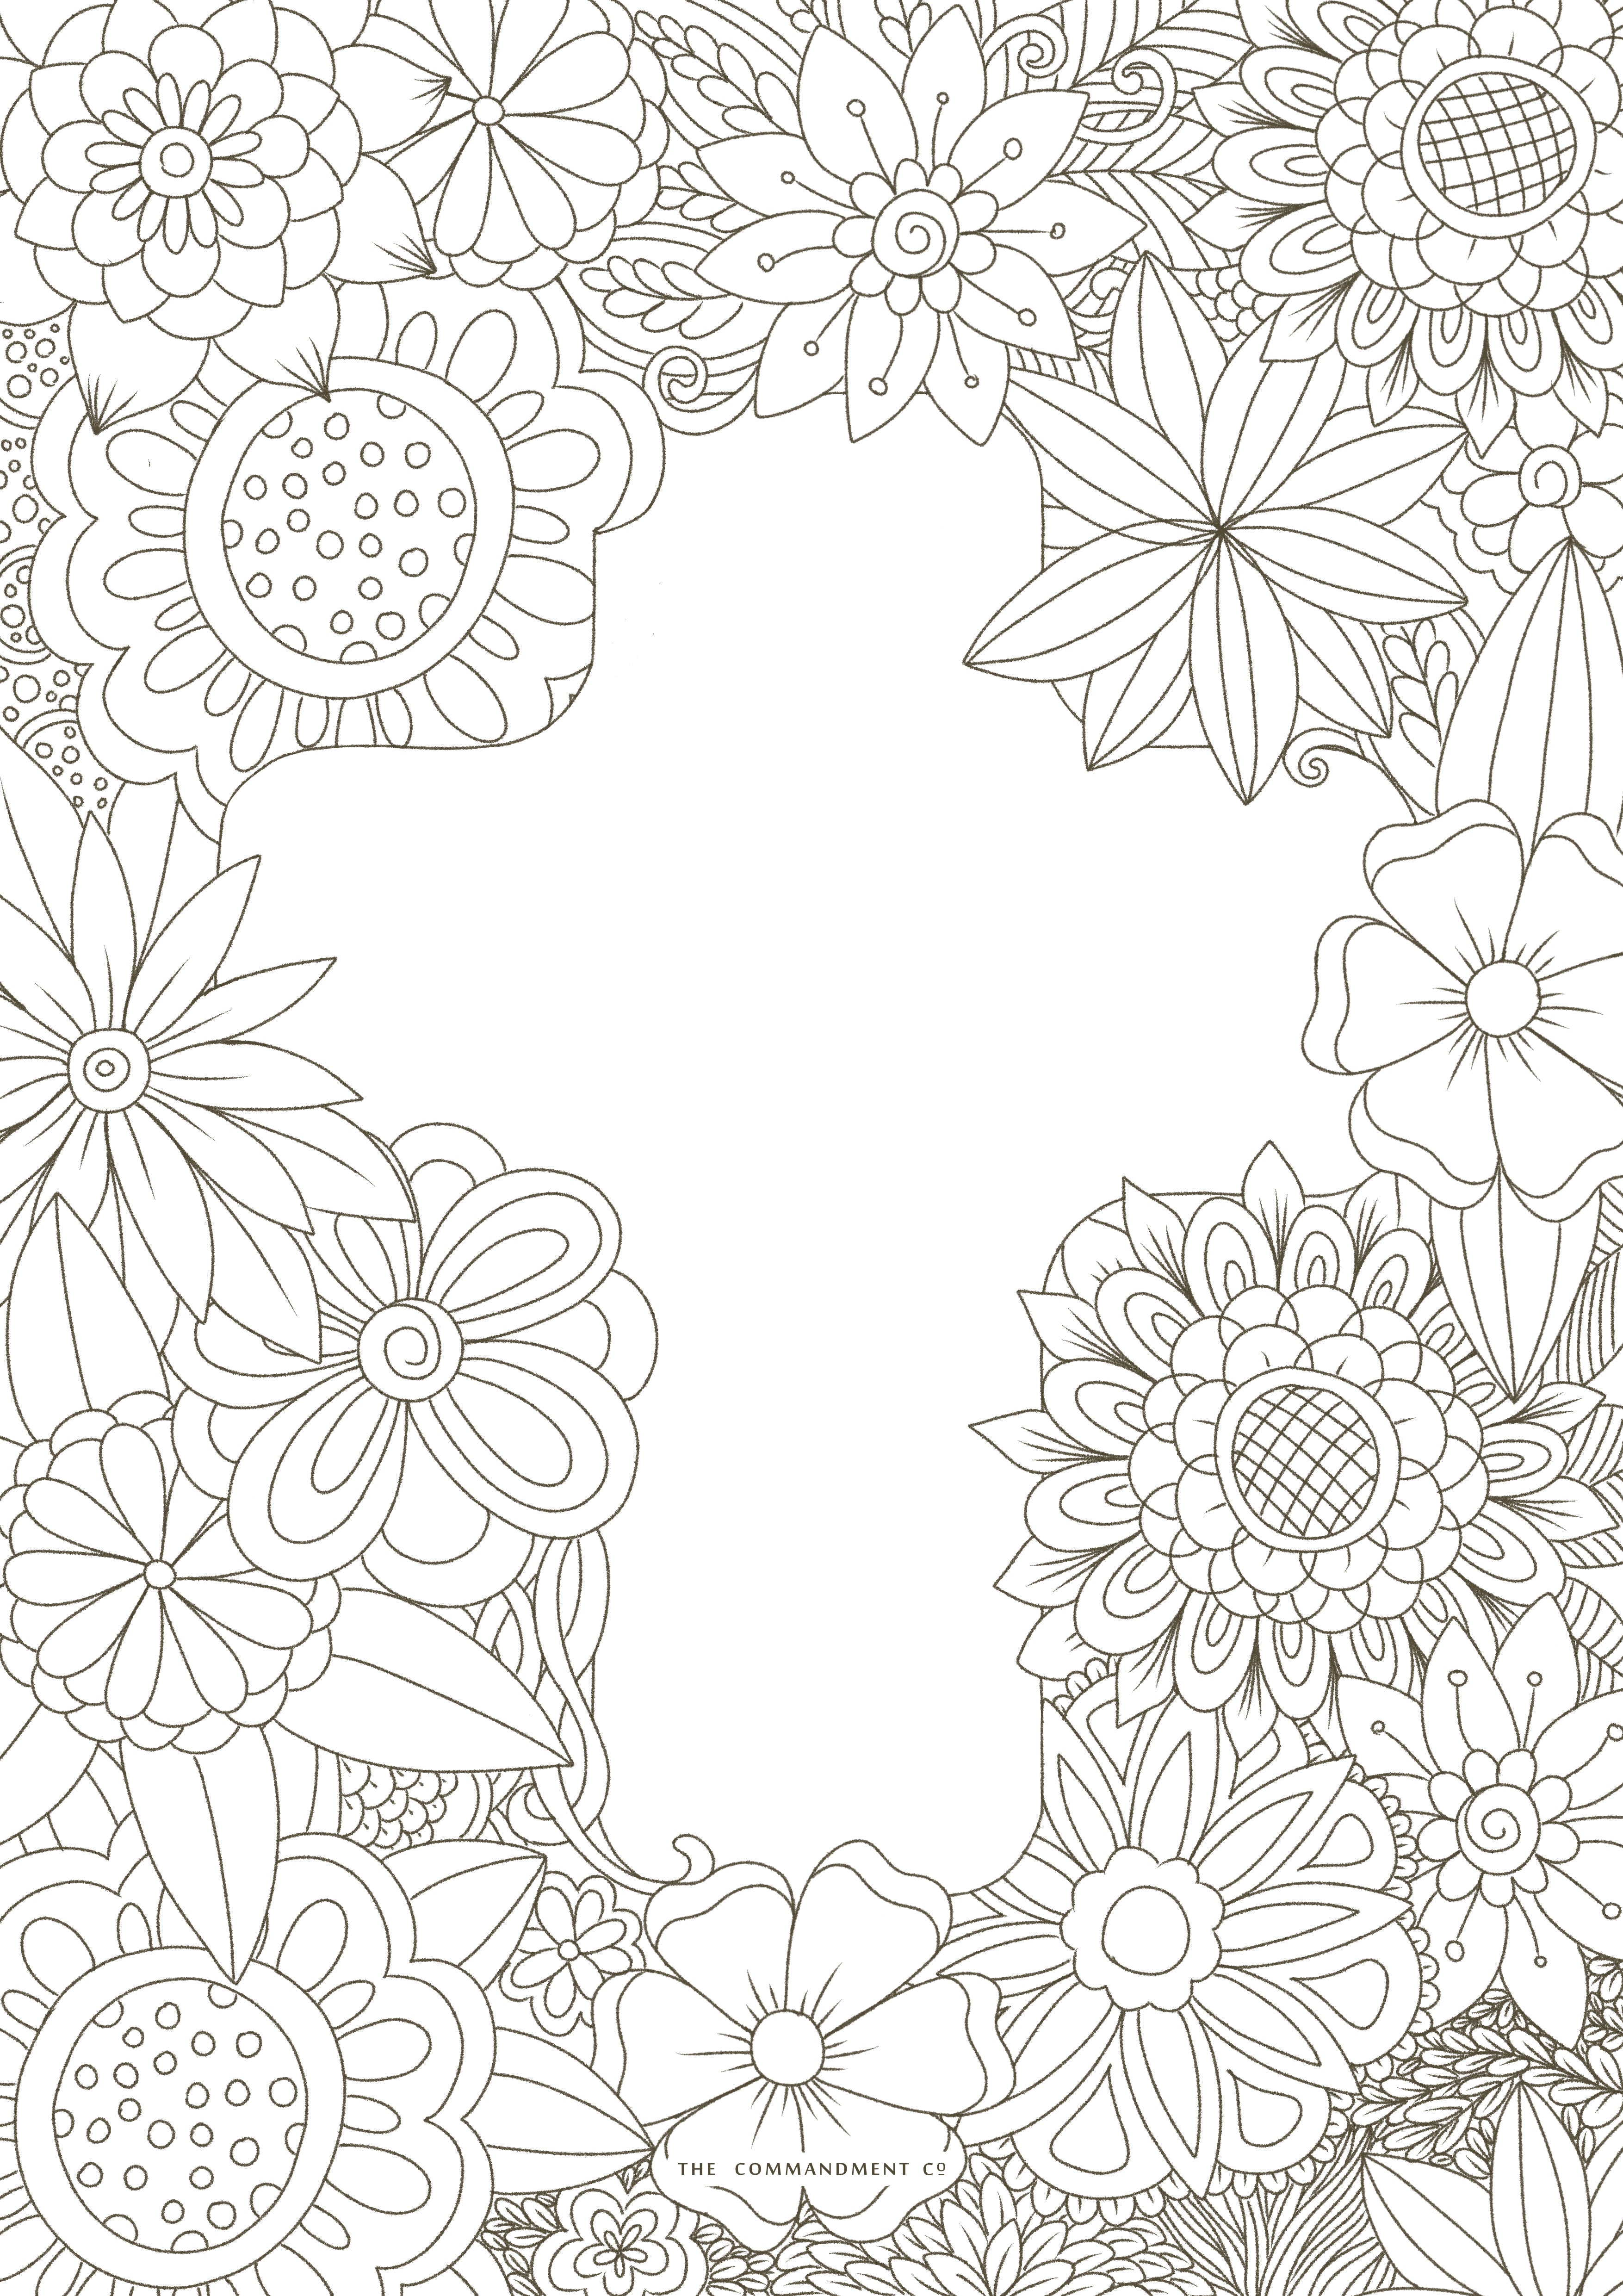 Christian Cross and Flowers Coloring sheet by the commandment co